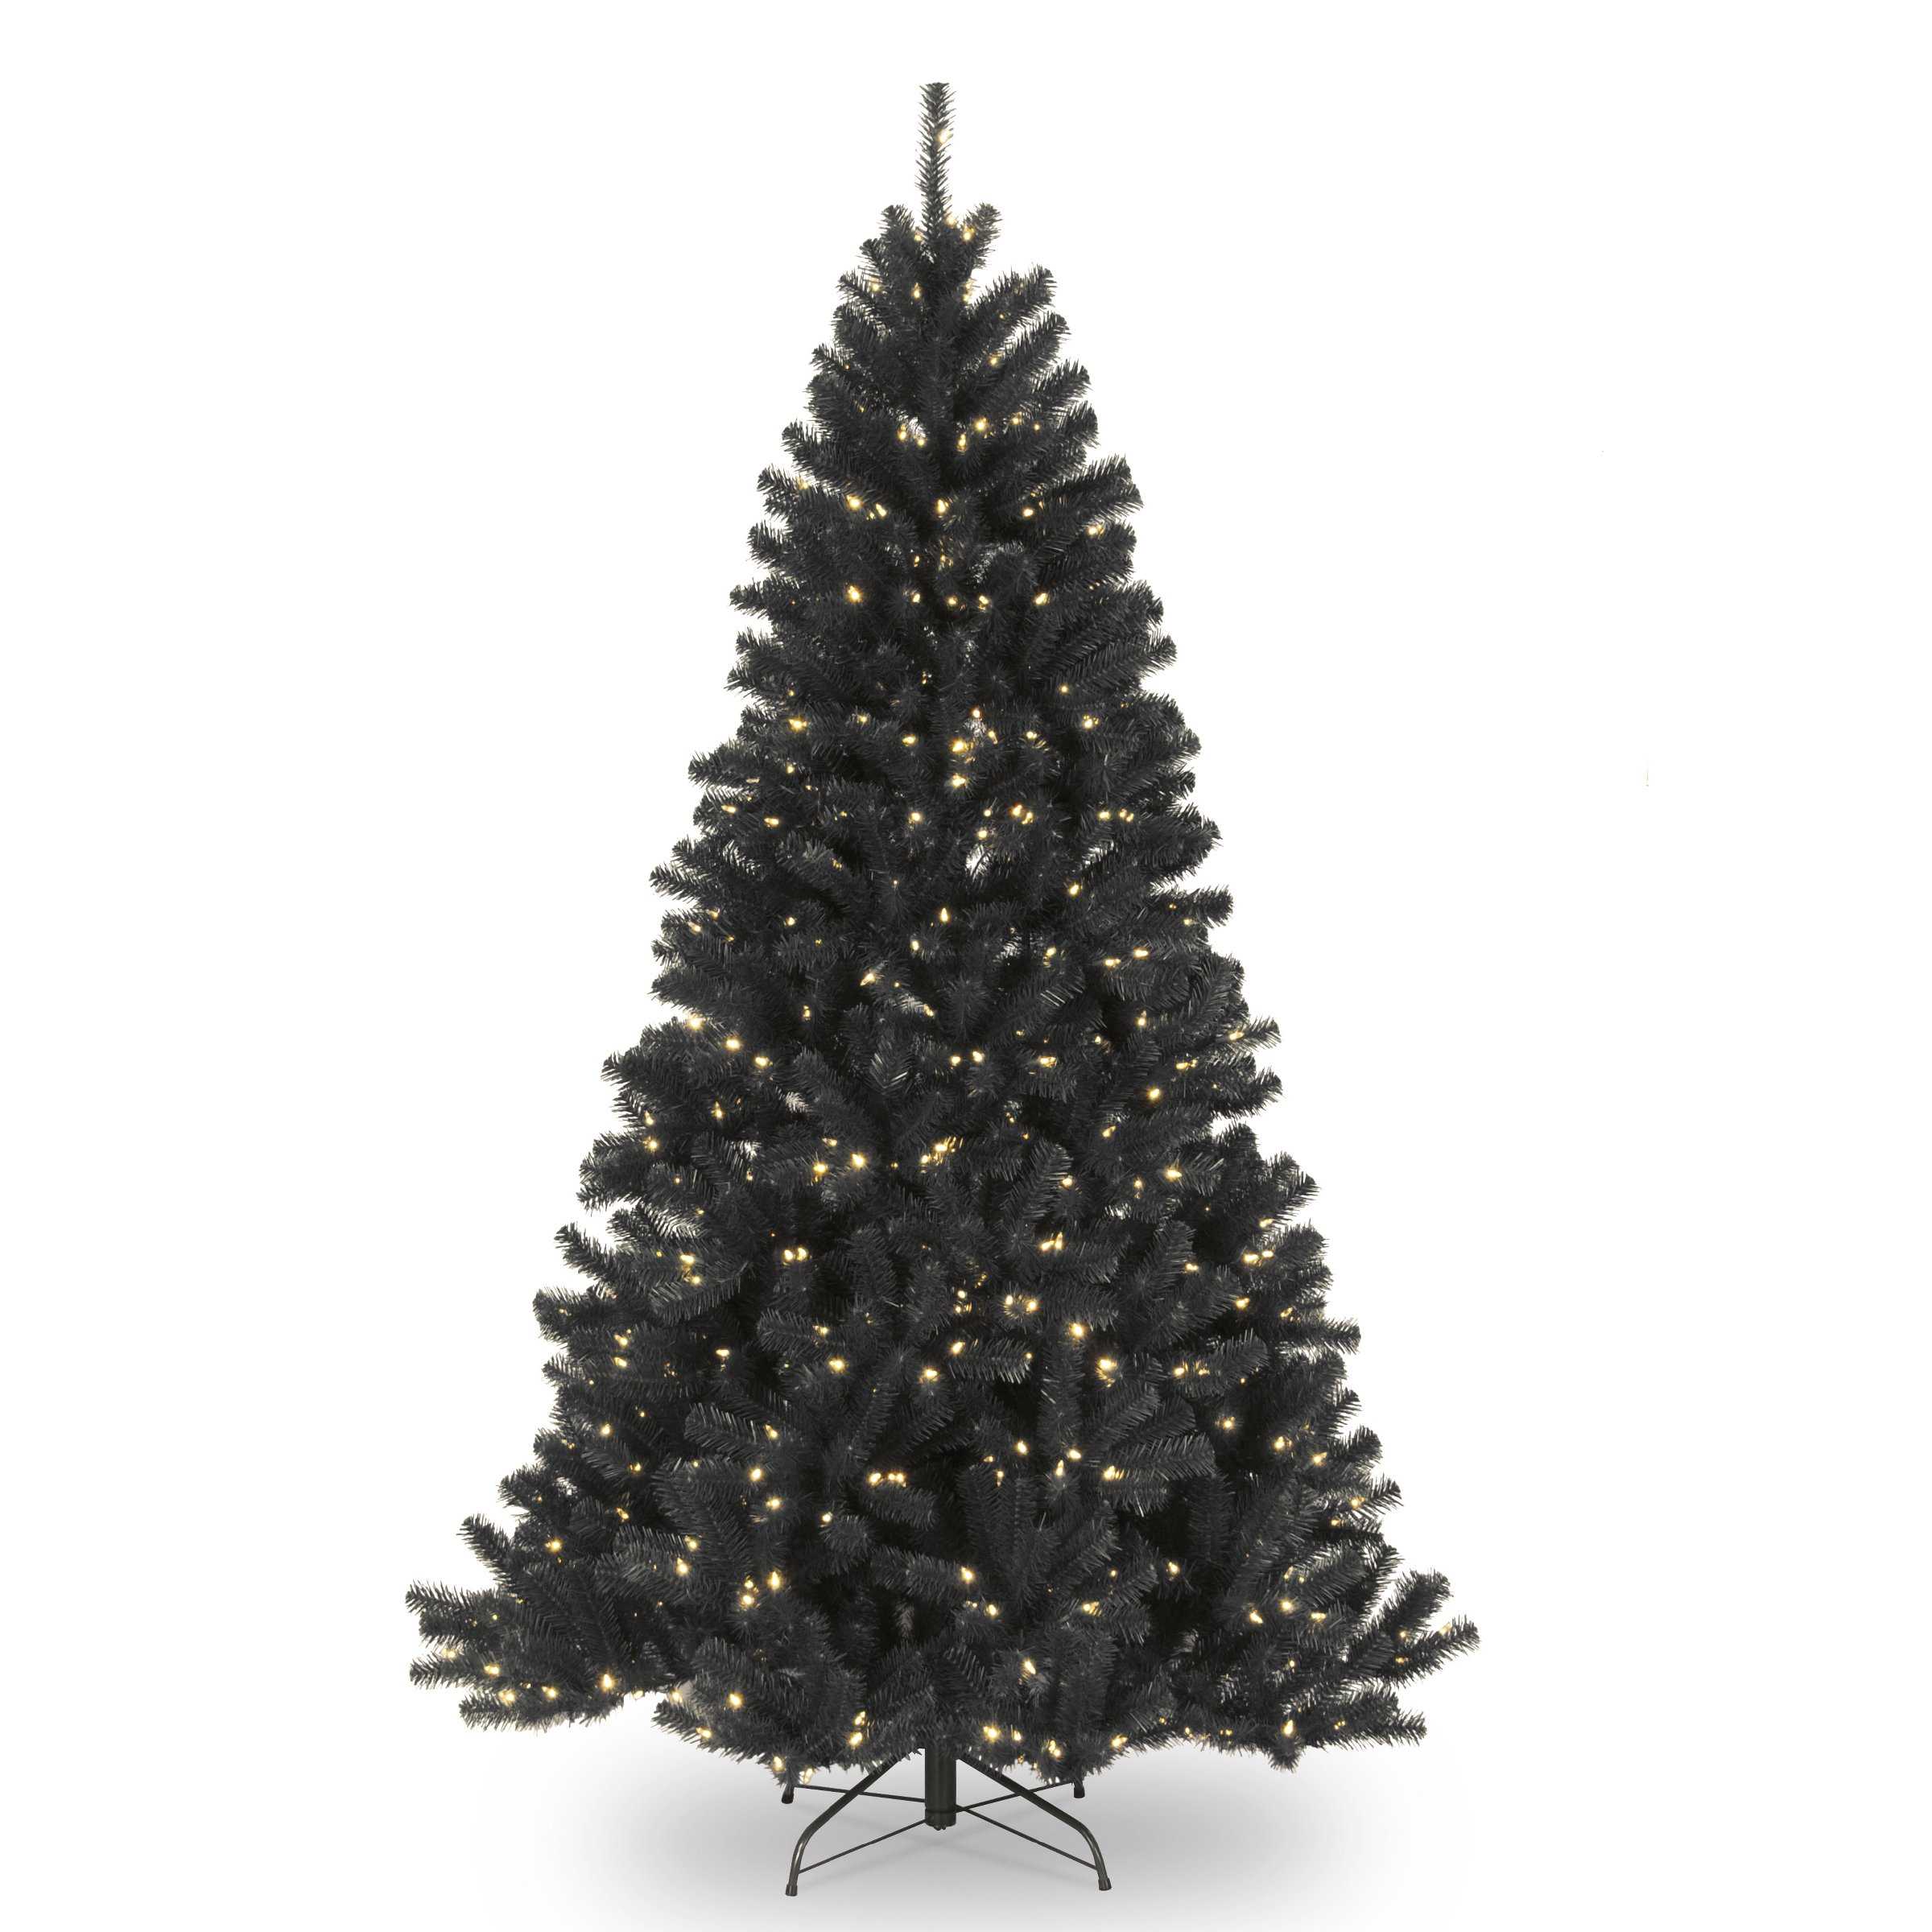 National Tree Company Pre-Lit Artificial Full Christmas Tree, Black, North Valley Spruce, White Lights, Includes Stand, 7.5 Feet